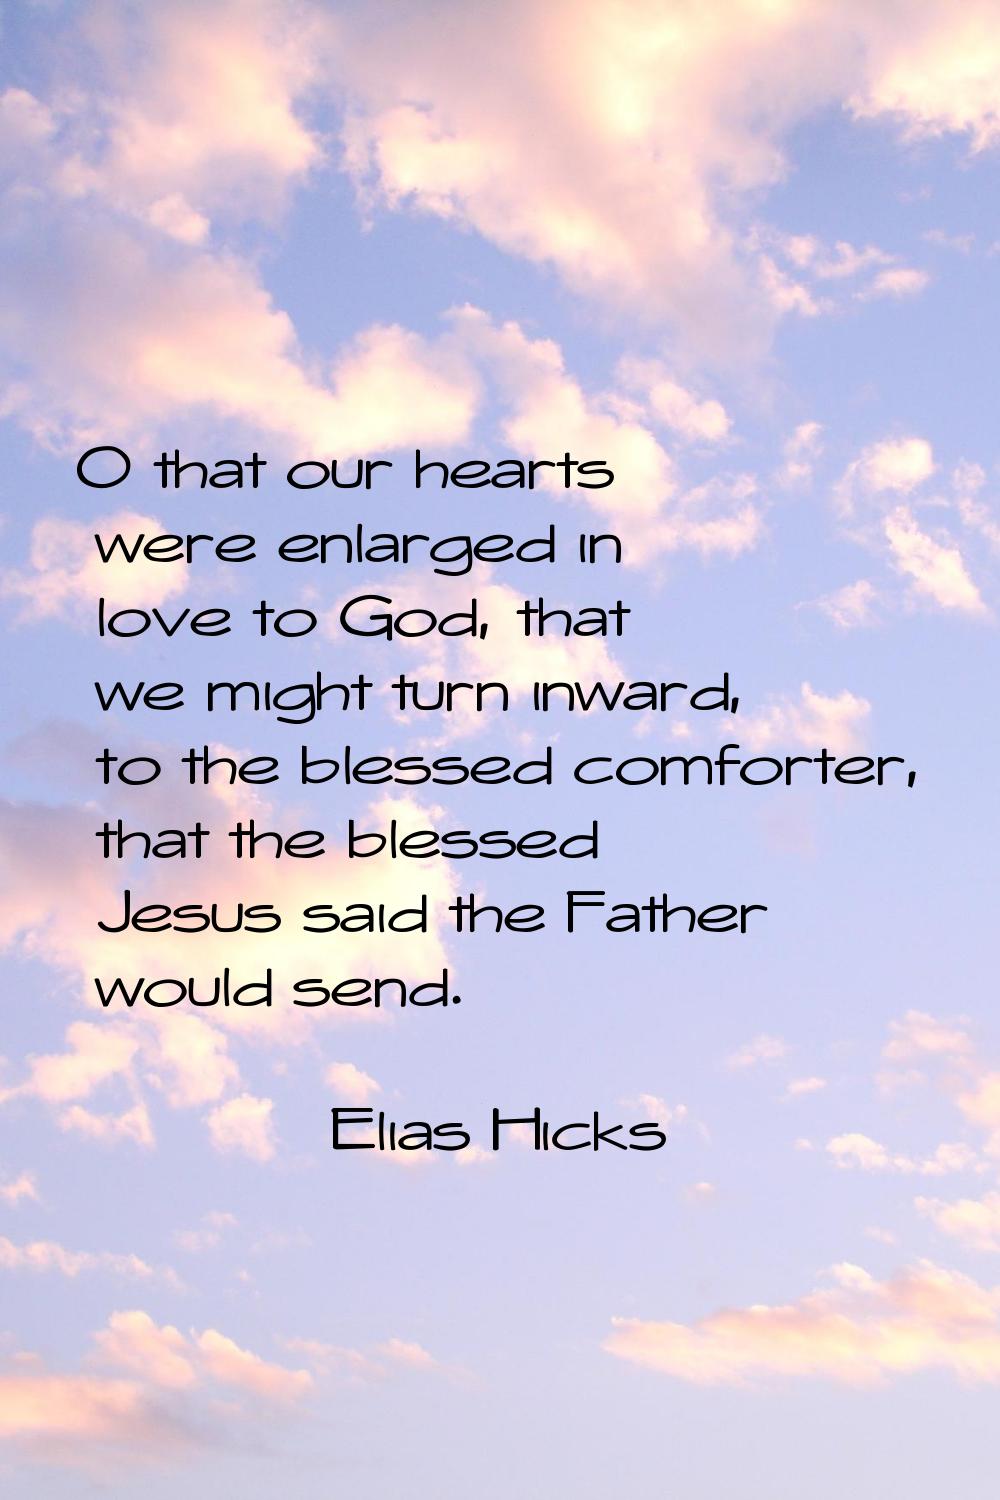 O that our hearts were enlarged in love to God, that we might turn inward, to the blessed comforter